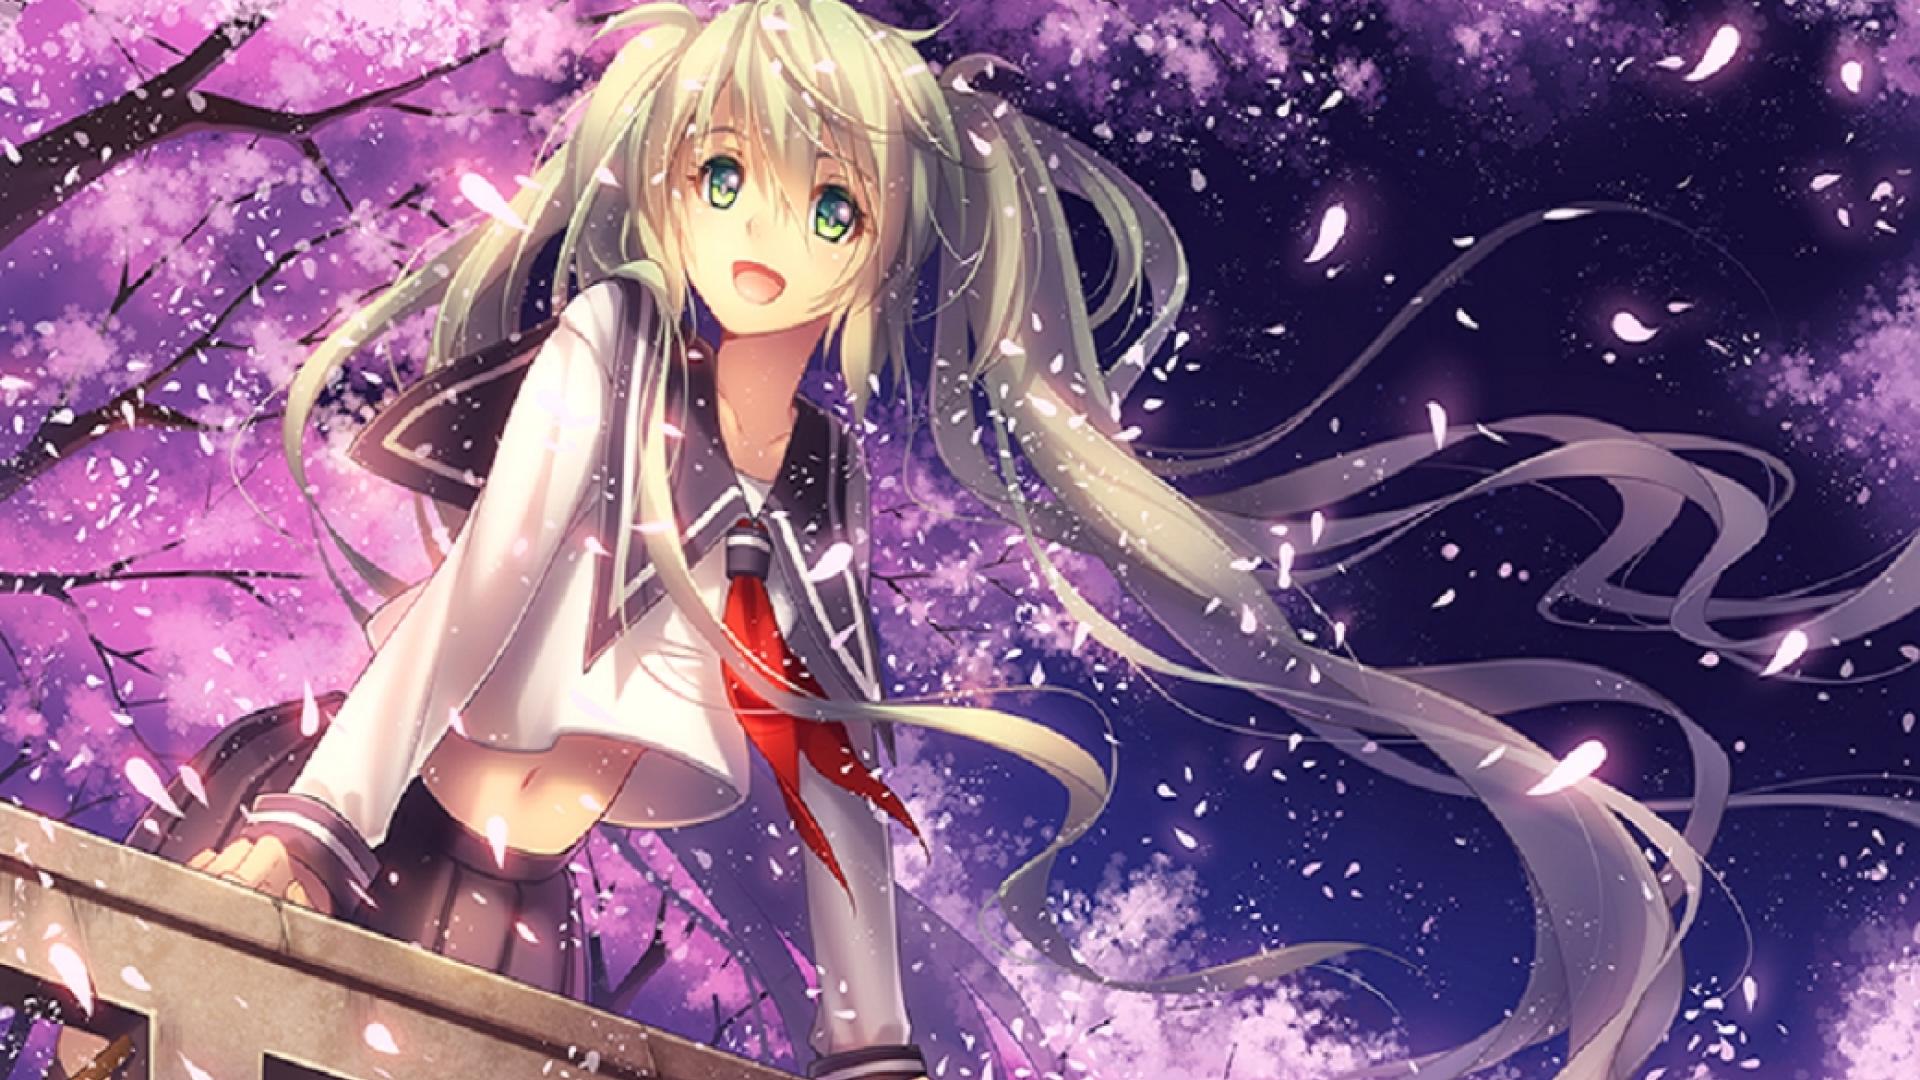 49+ Beautiful Anime Wallpapers In High-Resolution - Templatefor